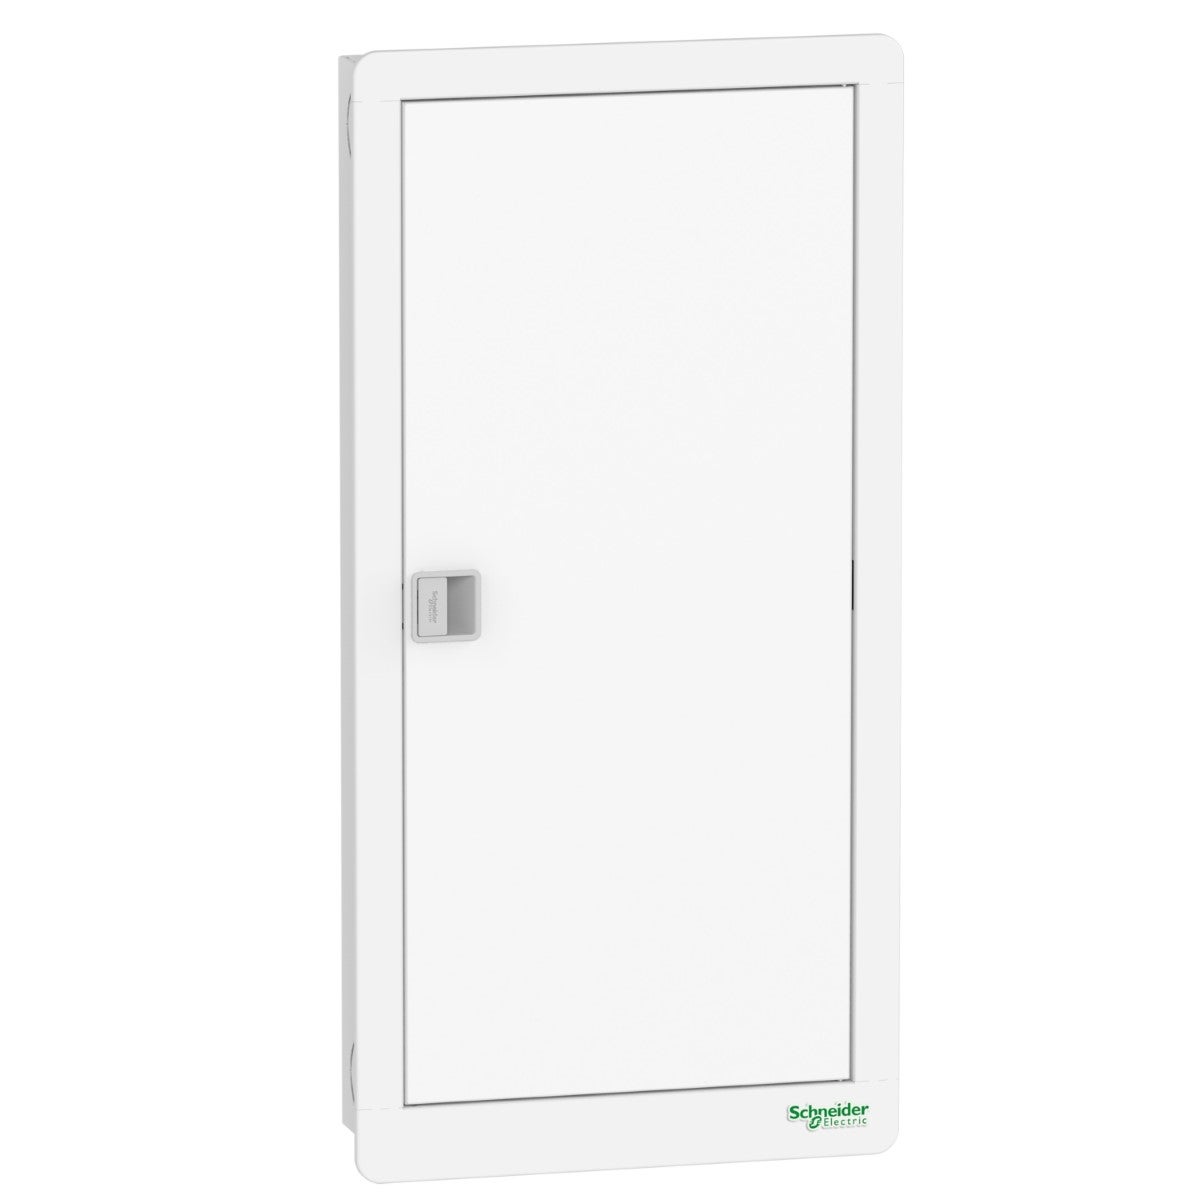 Vertical TPN distribution board, Acti9 Disbo, 30 way, 100A, EZC incomer, surface mount